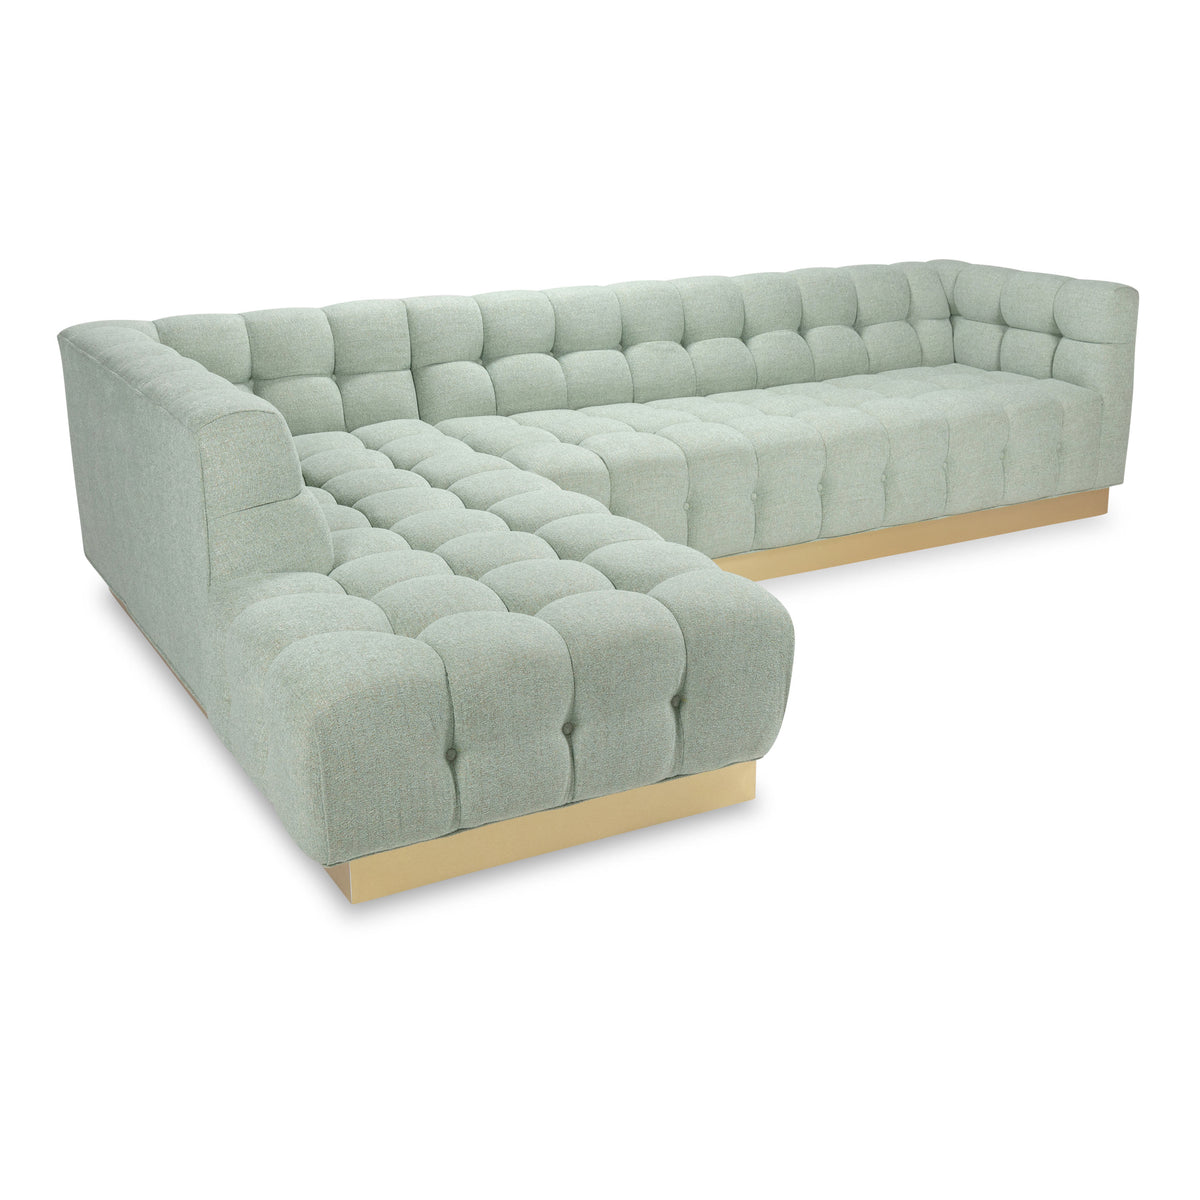 Delano Sectional w/ Chaise in Patina Chenile